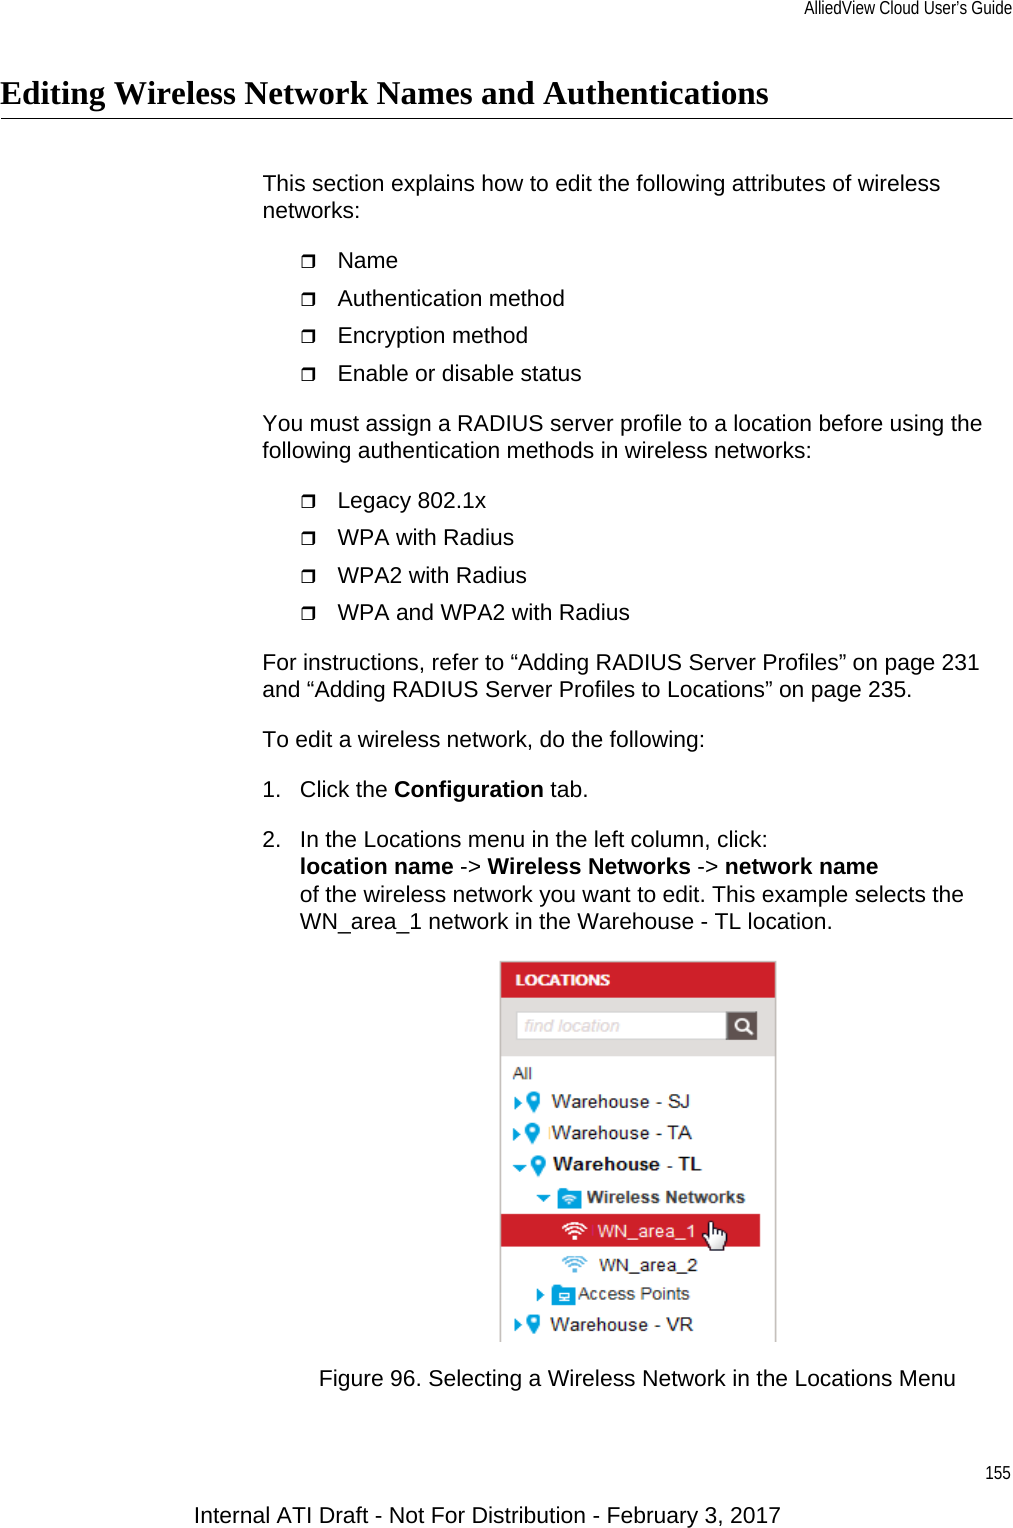 AlliedView Cloud User’s Guide155Editing Wireless Network Names and AuthenticationsThis section explains how to edit the following attributes of wireless networks:NameAuthentication methodEncryption methodEnable or disable statusYou must assign a RADIUS server profile to a location before using the following authentication methods in wireless networks:Legacy 802.1xWPA with RadiusWPA2 with RadiusWPA and WPA2 with RadiusFor instructions, refer to “Adding RADIUS Server Profiles” on page 231 and “Adding RADIUS Server Profiles to Locations” on page 235.To edit a wireless network, do the following:1. Click the Configuration tab.2. In the Locations menu in the left column, click:location name -&gt; Wireless Networks -&gt; network nameof the wireless network you want to edit. This example selects the WN_area_1 network in the Warehouse - TL location.Figure 96. Selecting a Wireless Network in the Locations MenuInternal ATI Draft - Not For Distribution - February 3, 2017